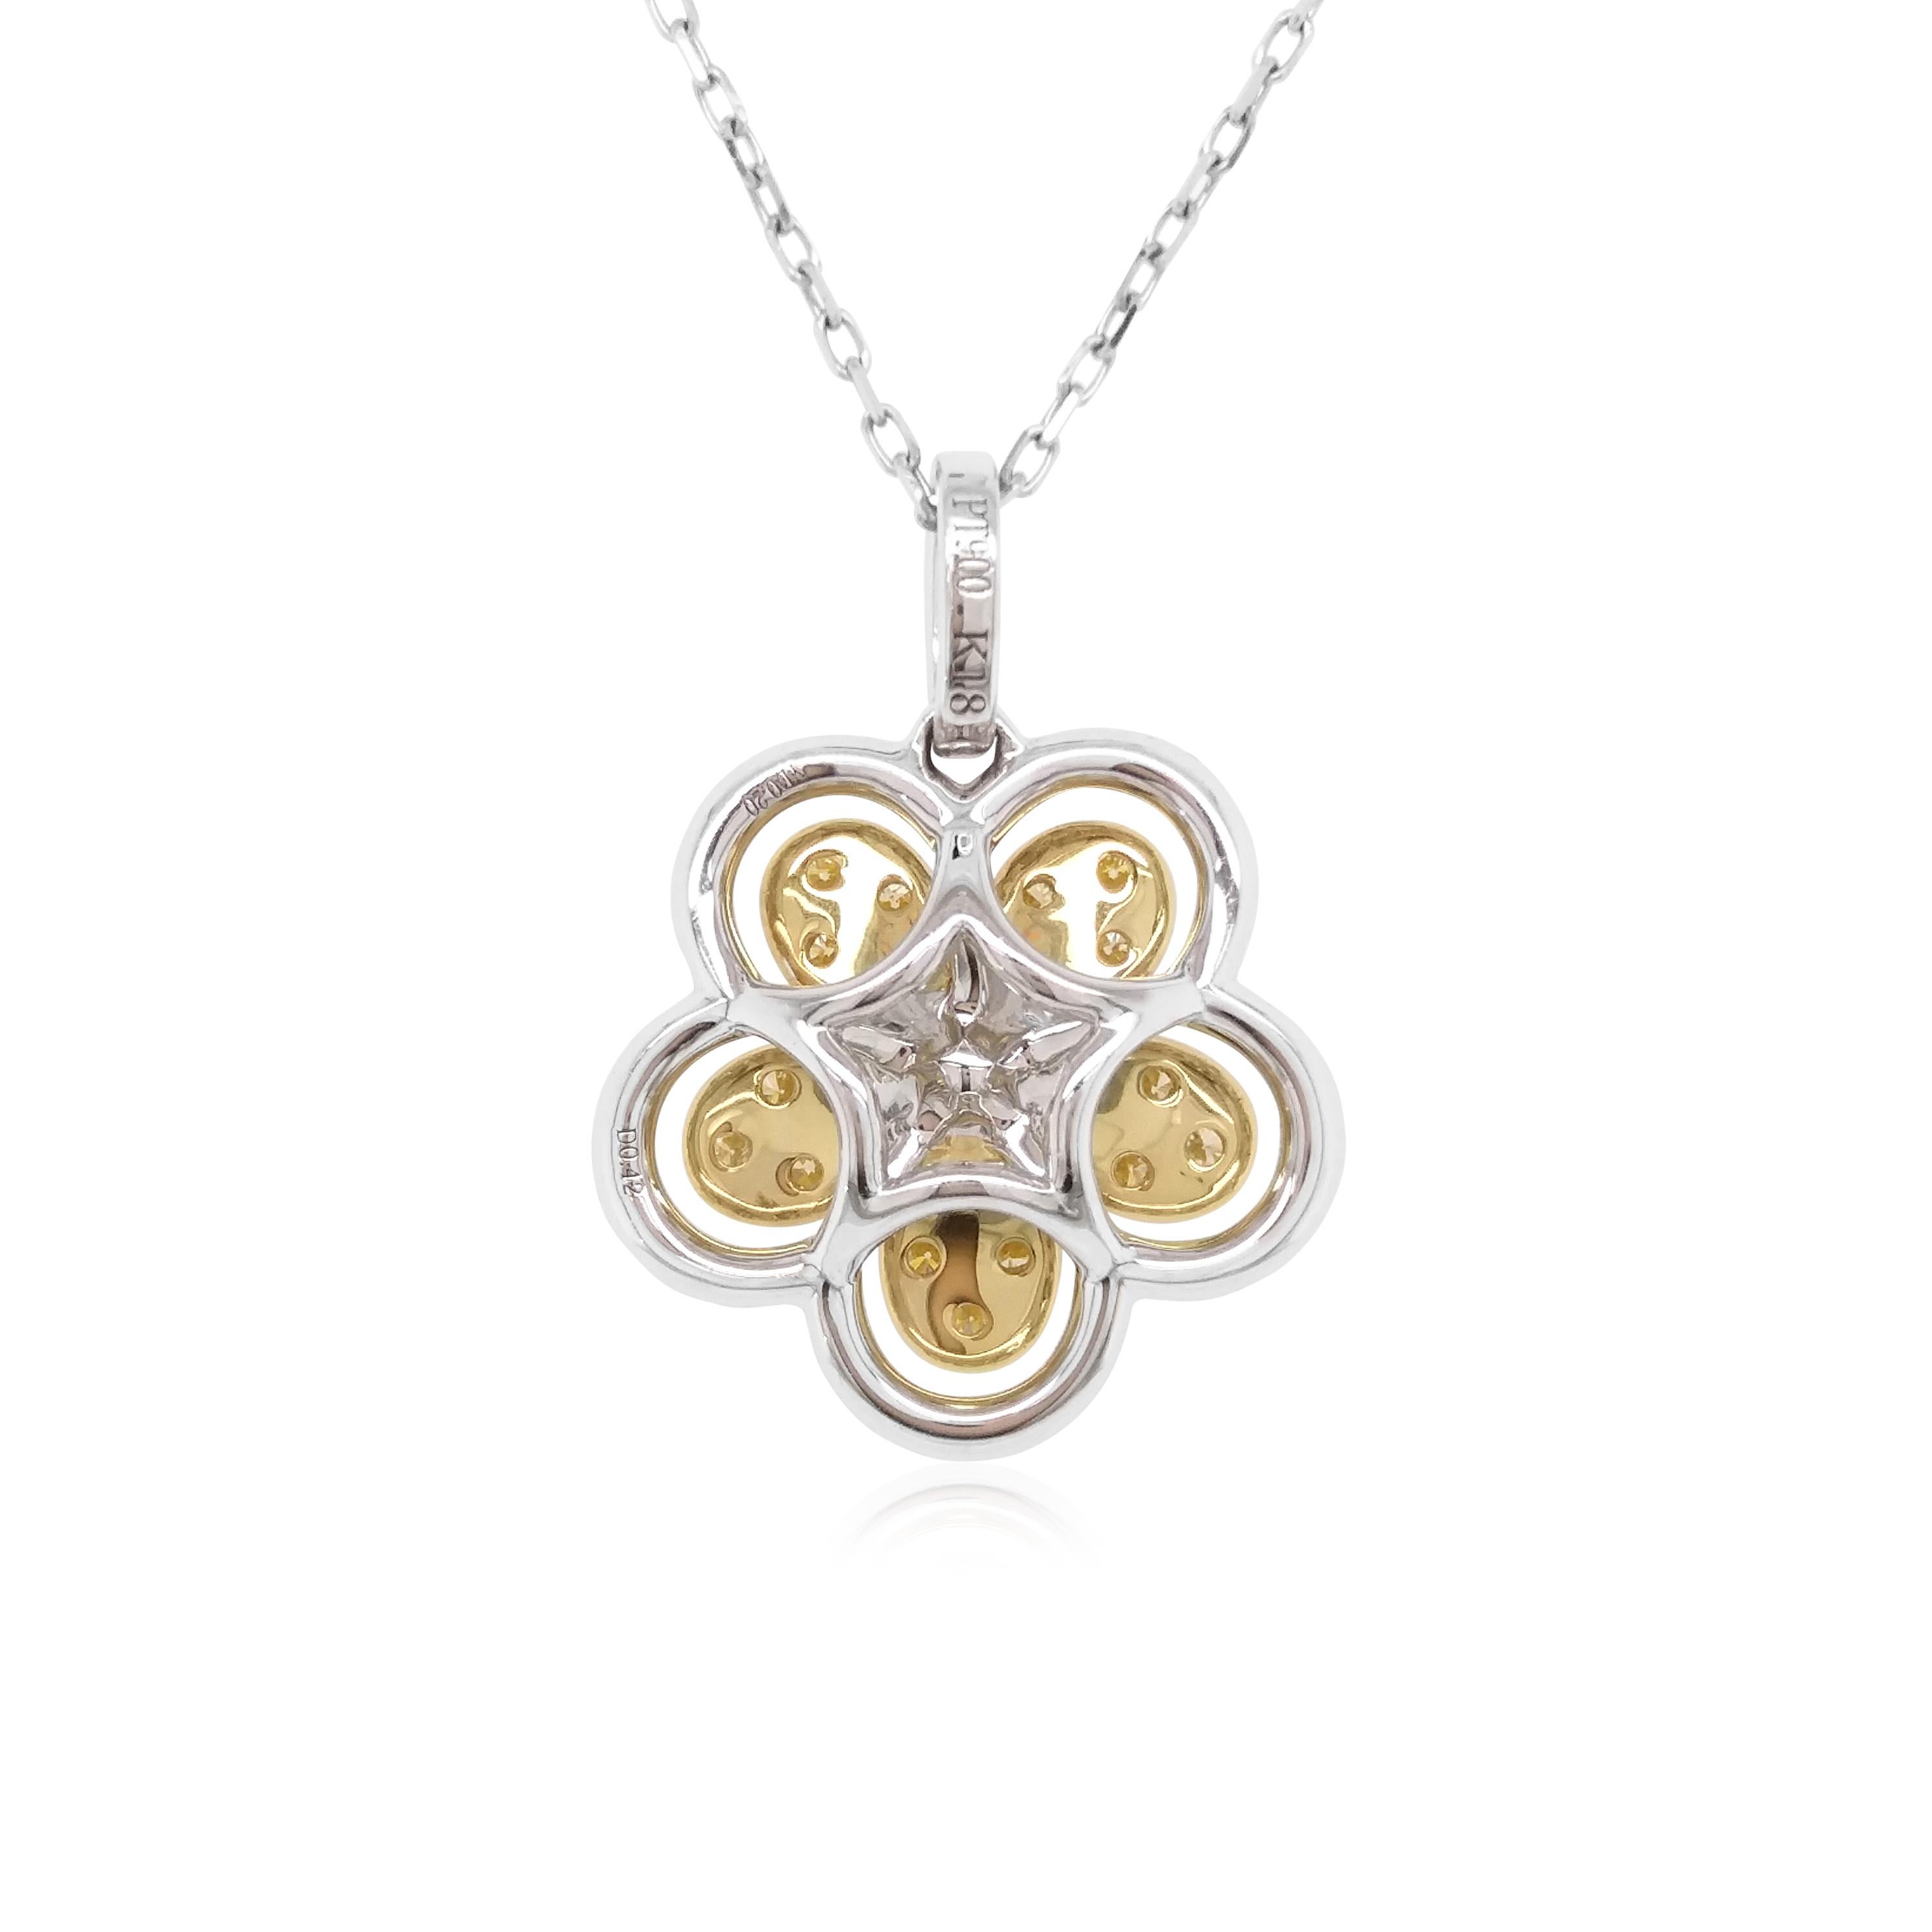 This unique floral pendant features spectacular natural White and Yellow diamonds at its centre, surrounded by a bold pattern dazzling white diamonds. The perfect piece to take you from day to night, this pendant will elevate any outfit - especially